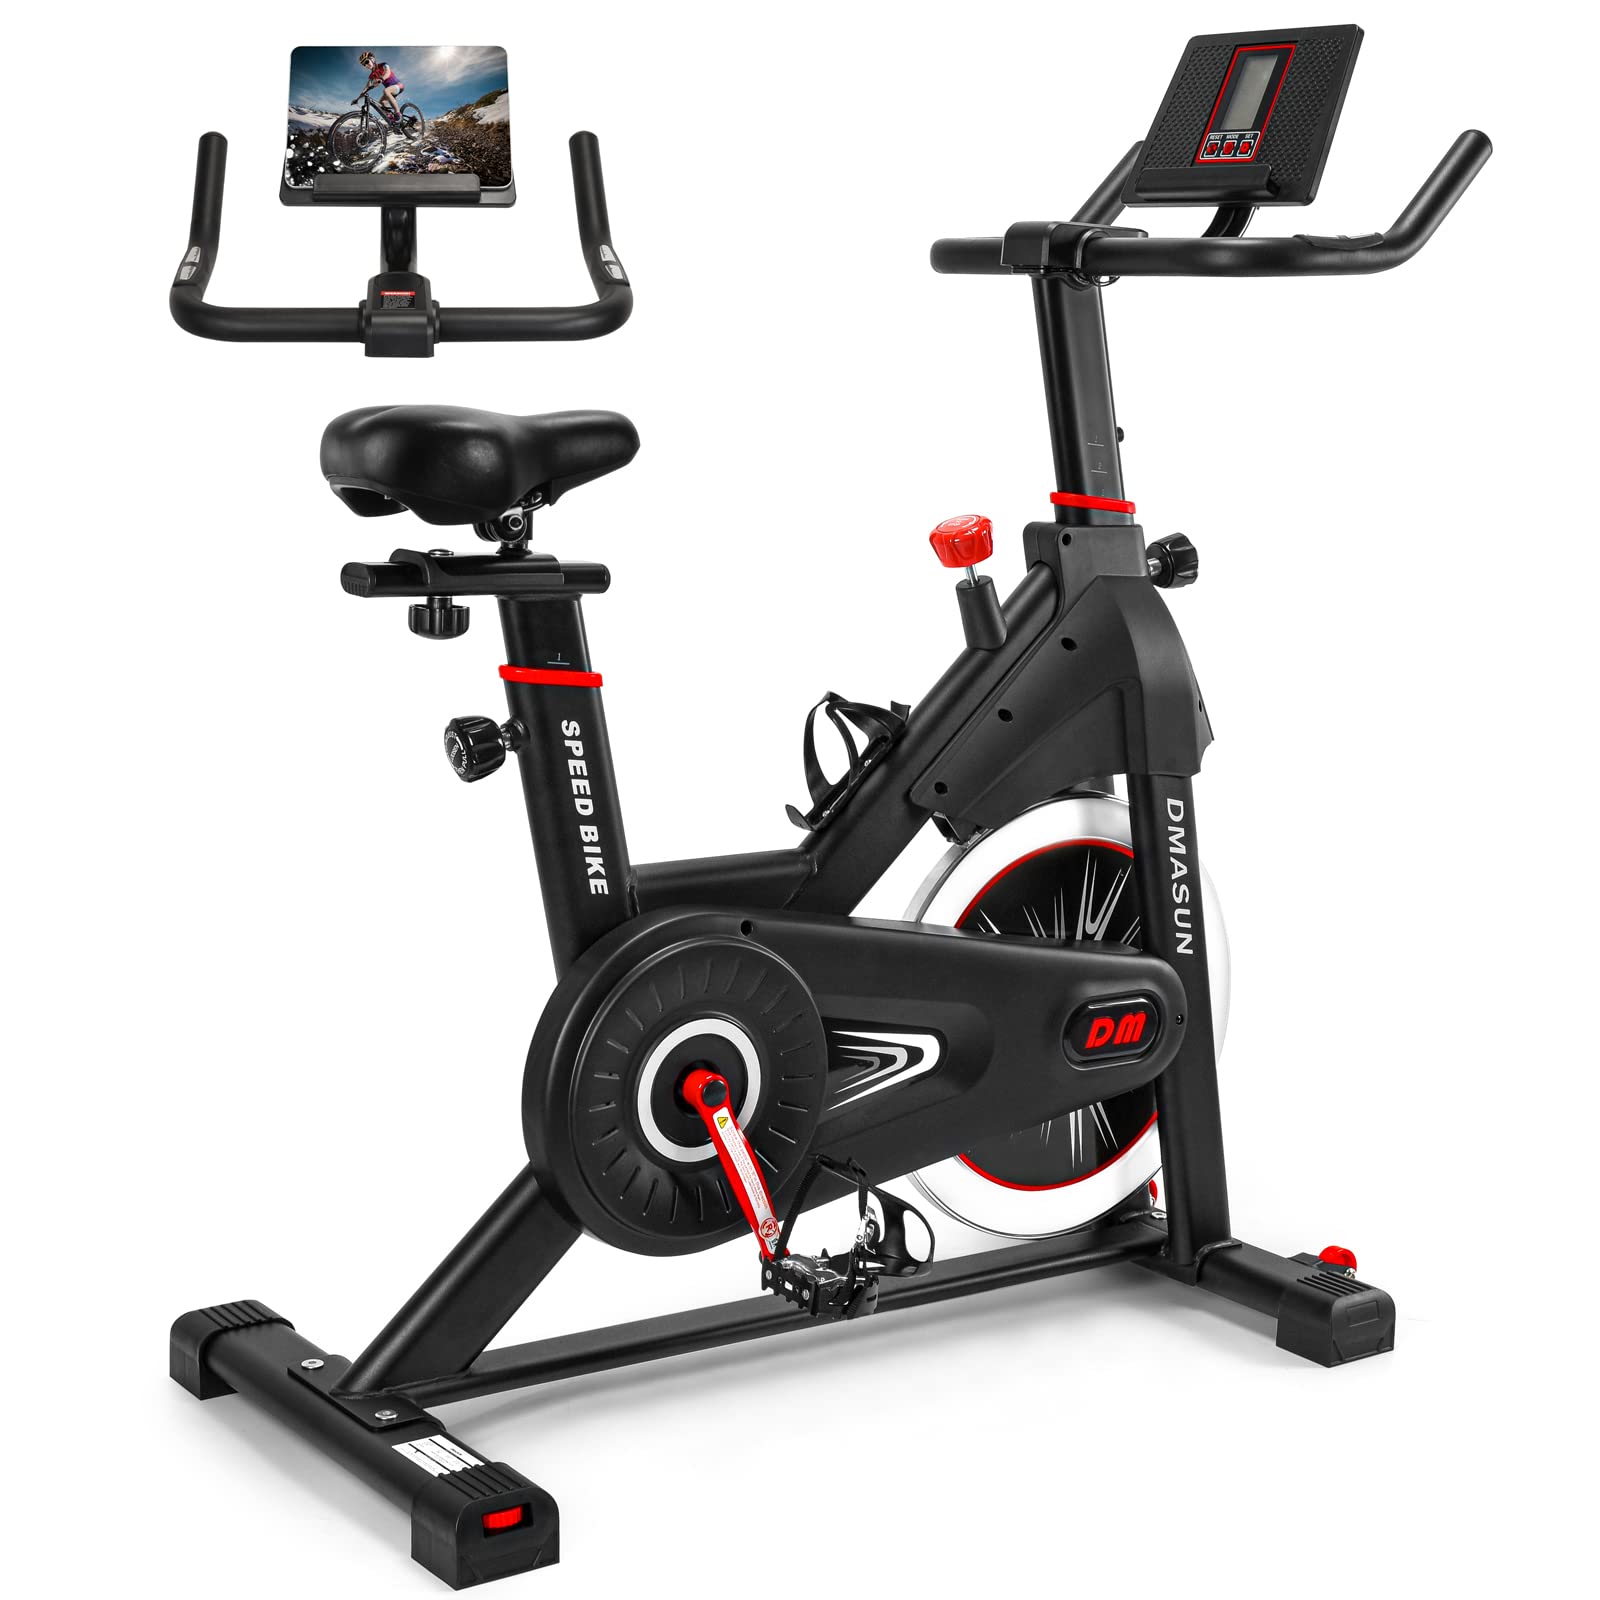 DMASUN Exercise Bike, Magnetic Resistance Stationary Bike, Indoor cycling Bike with comfortable Seat cushion, Digital Display wi